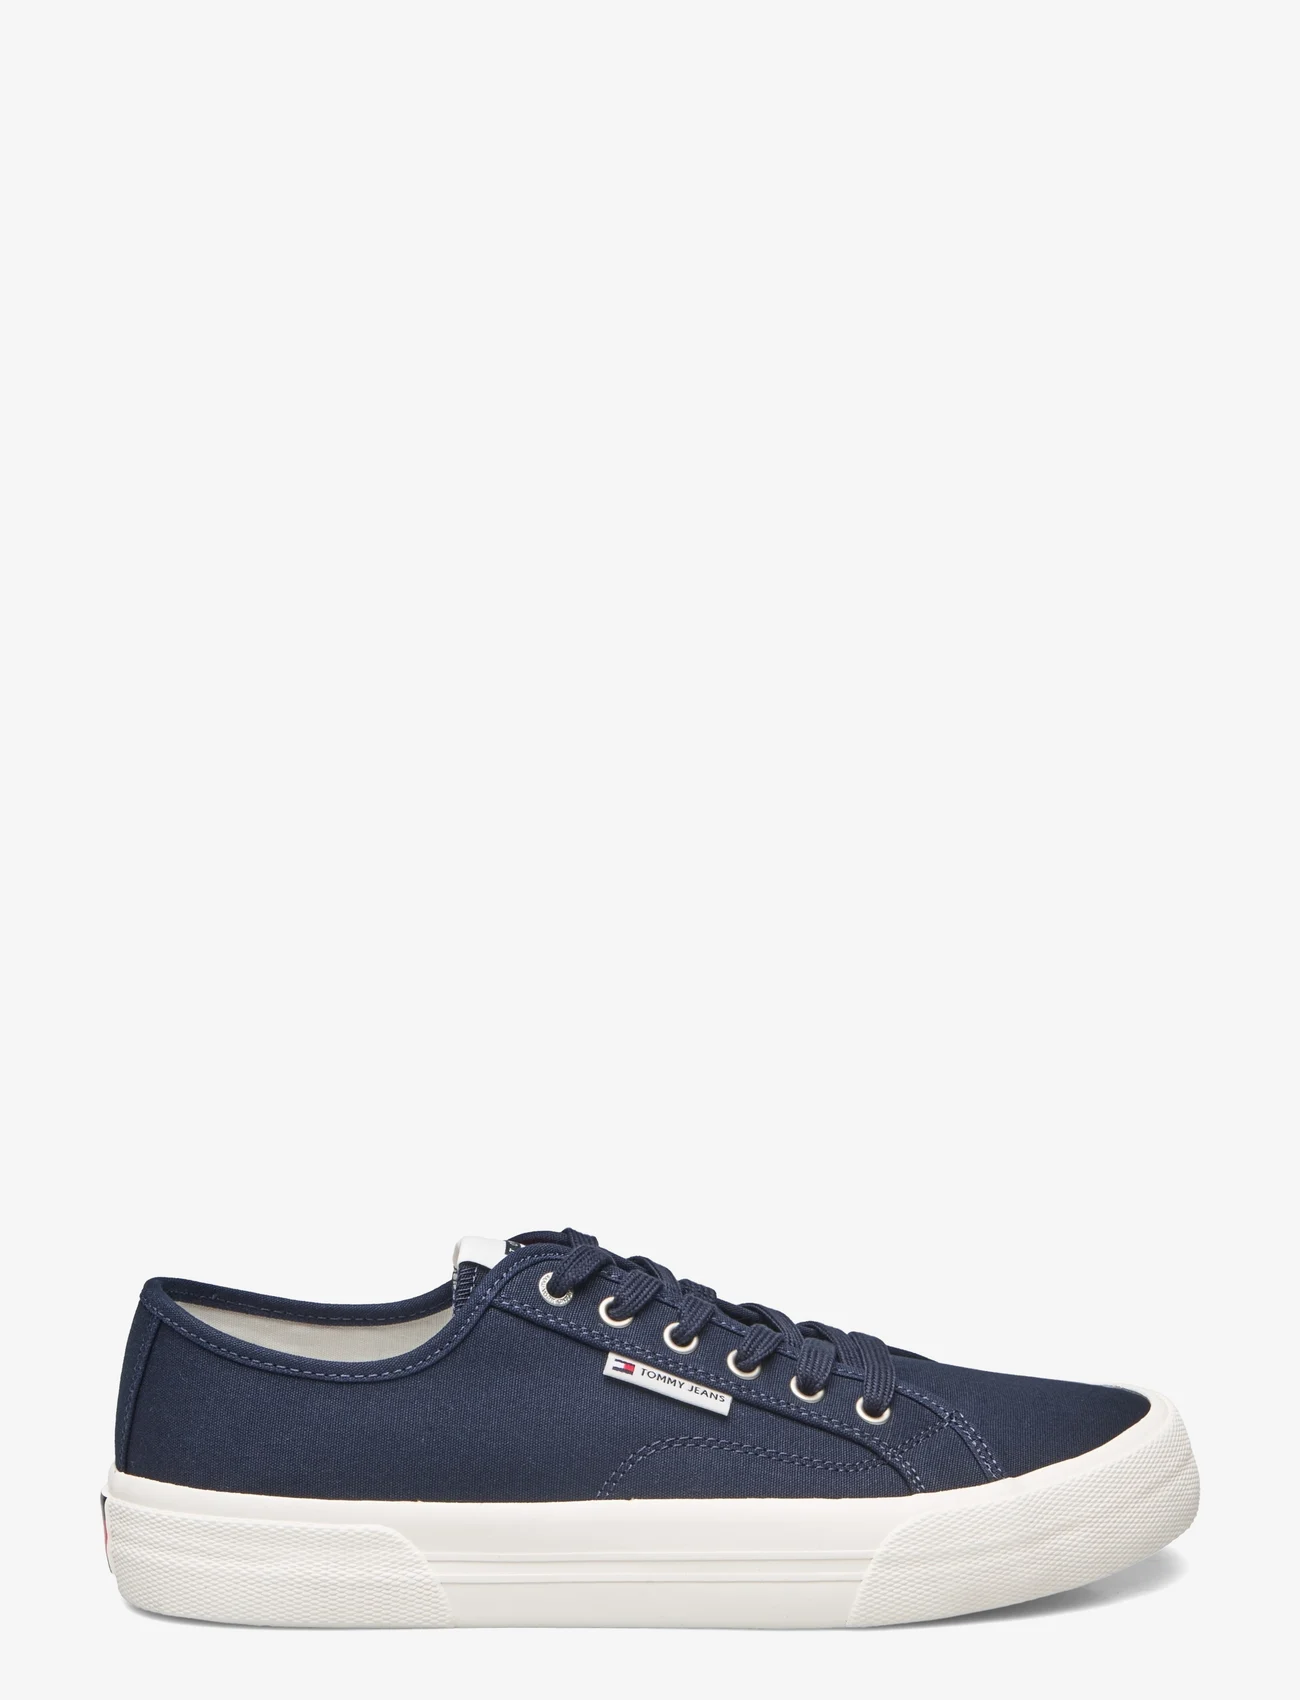 Tommy Hilfiger - TJM  LACE UP CANVAS COLOR - low tops - dark night navy - 1